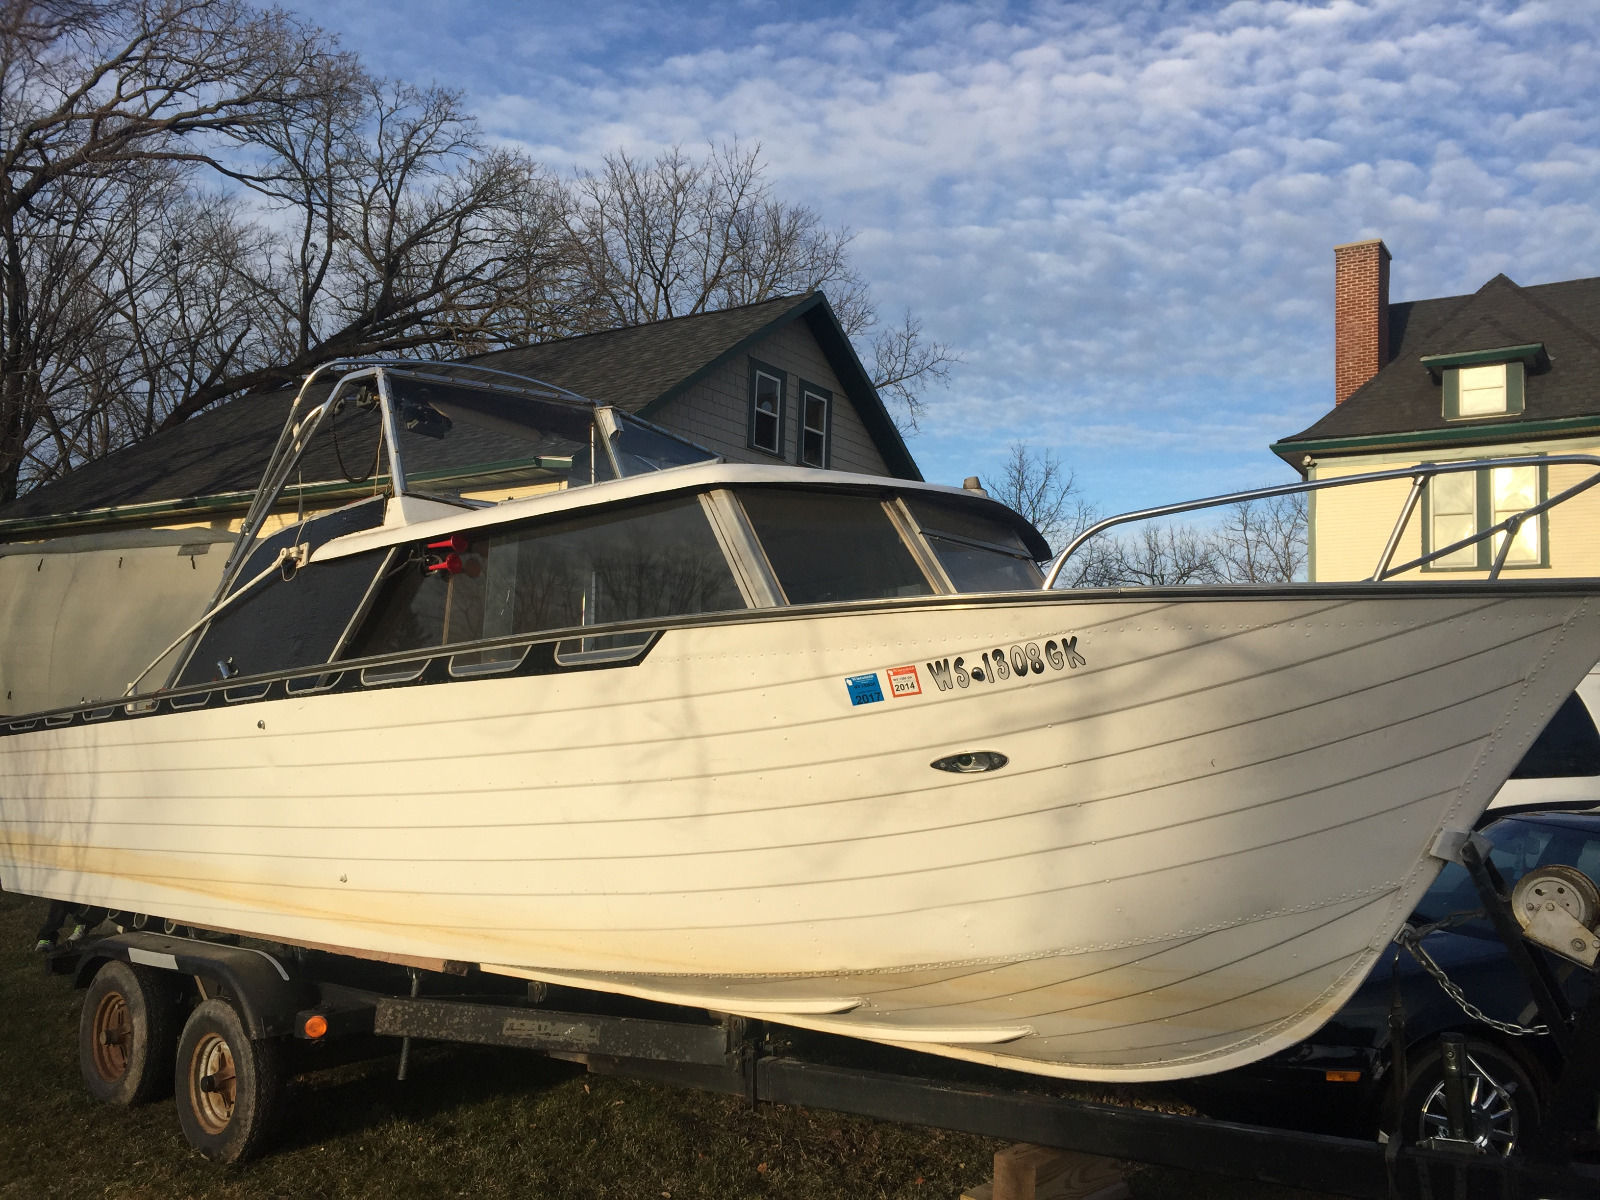 Chrysler Crusieliner III 1968 for sale for $3,900 - Boats ...